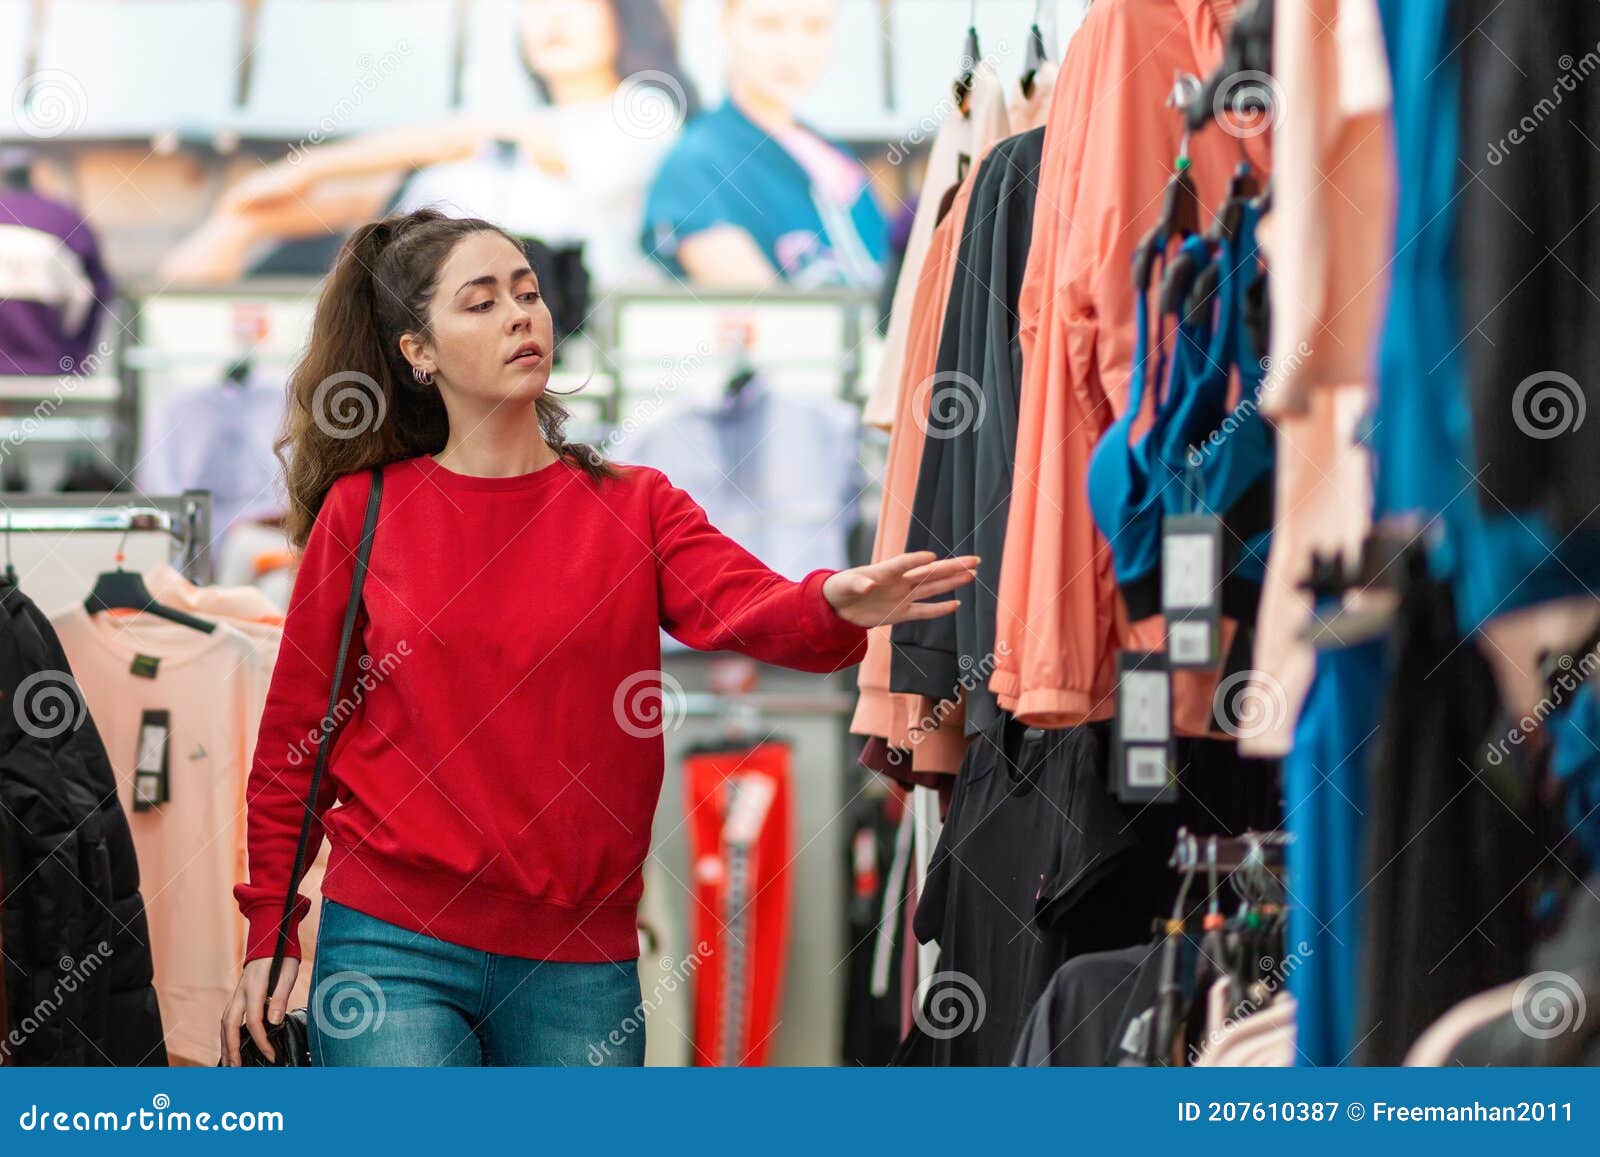 portrait of a young beautiful woman choosing clothes in a store. blurred traiding floor on the background. the concept of shopping